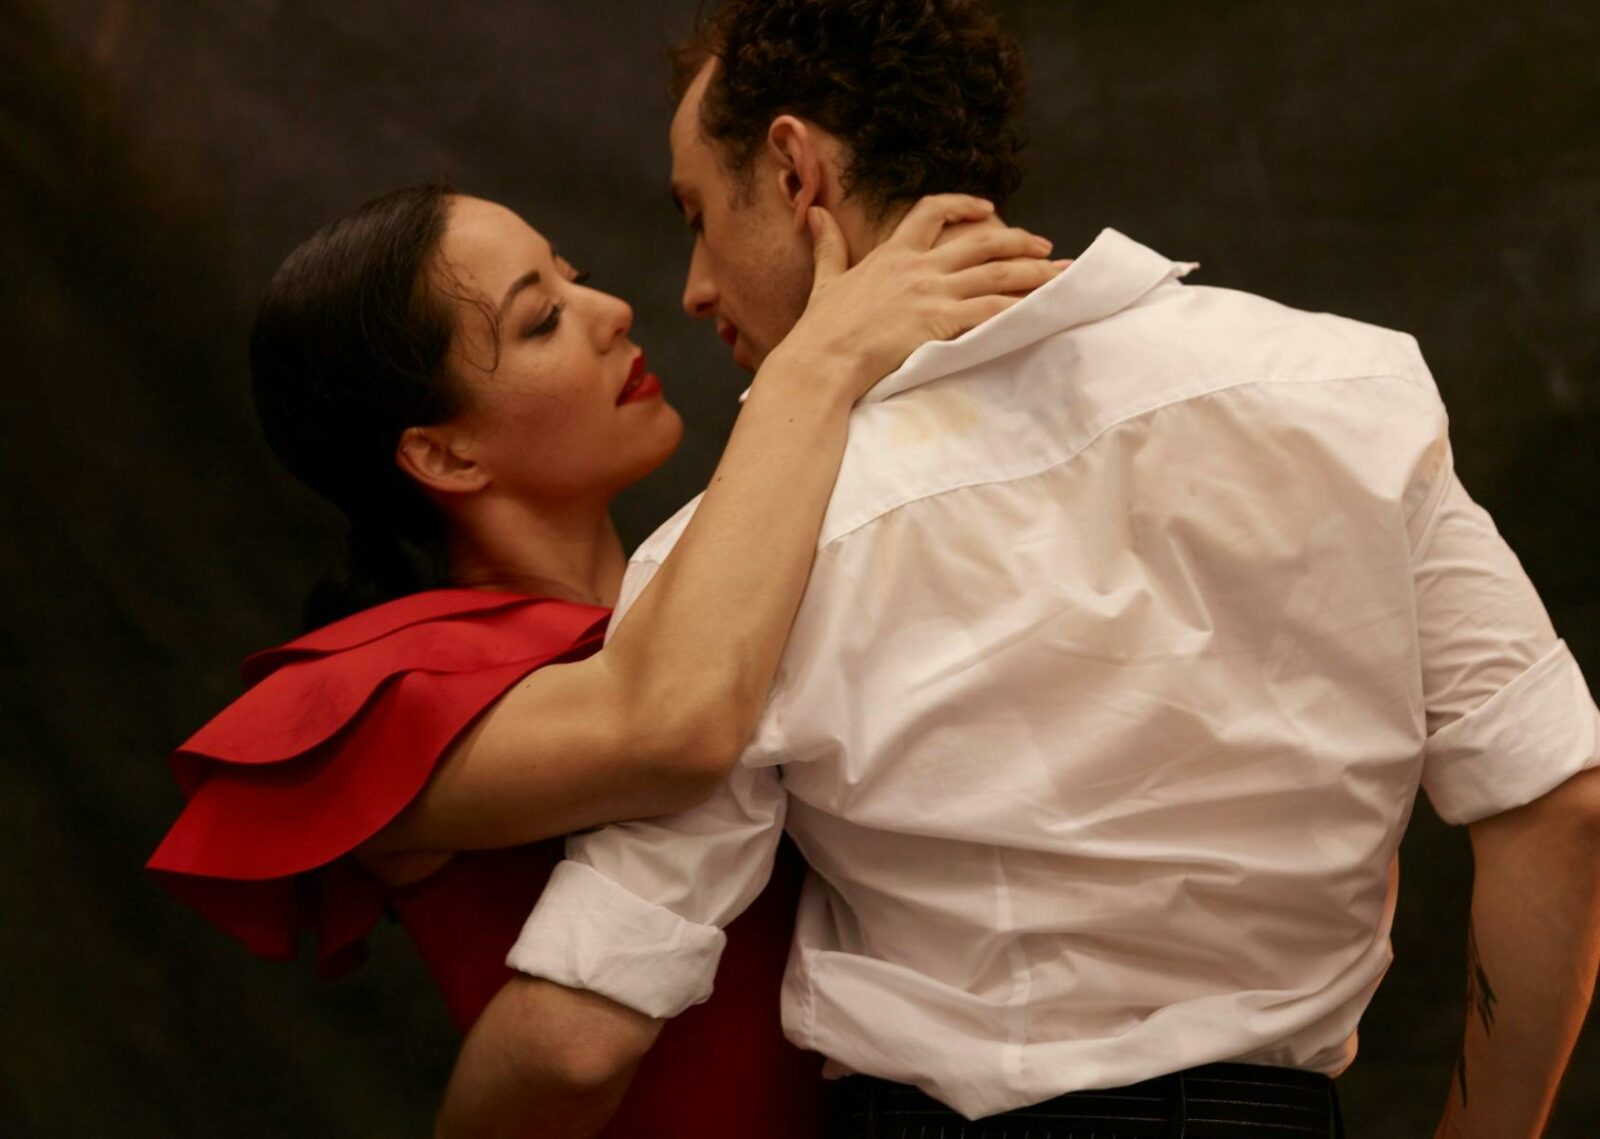 Dancer in a red dress passionately embracing a dancer in a white shirt